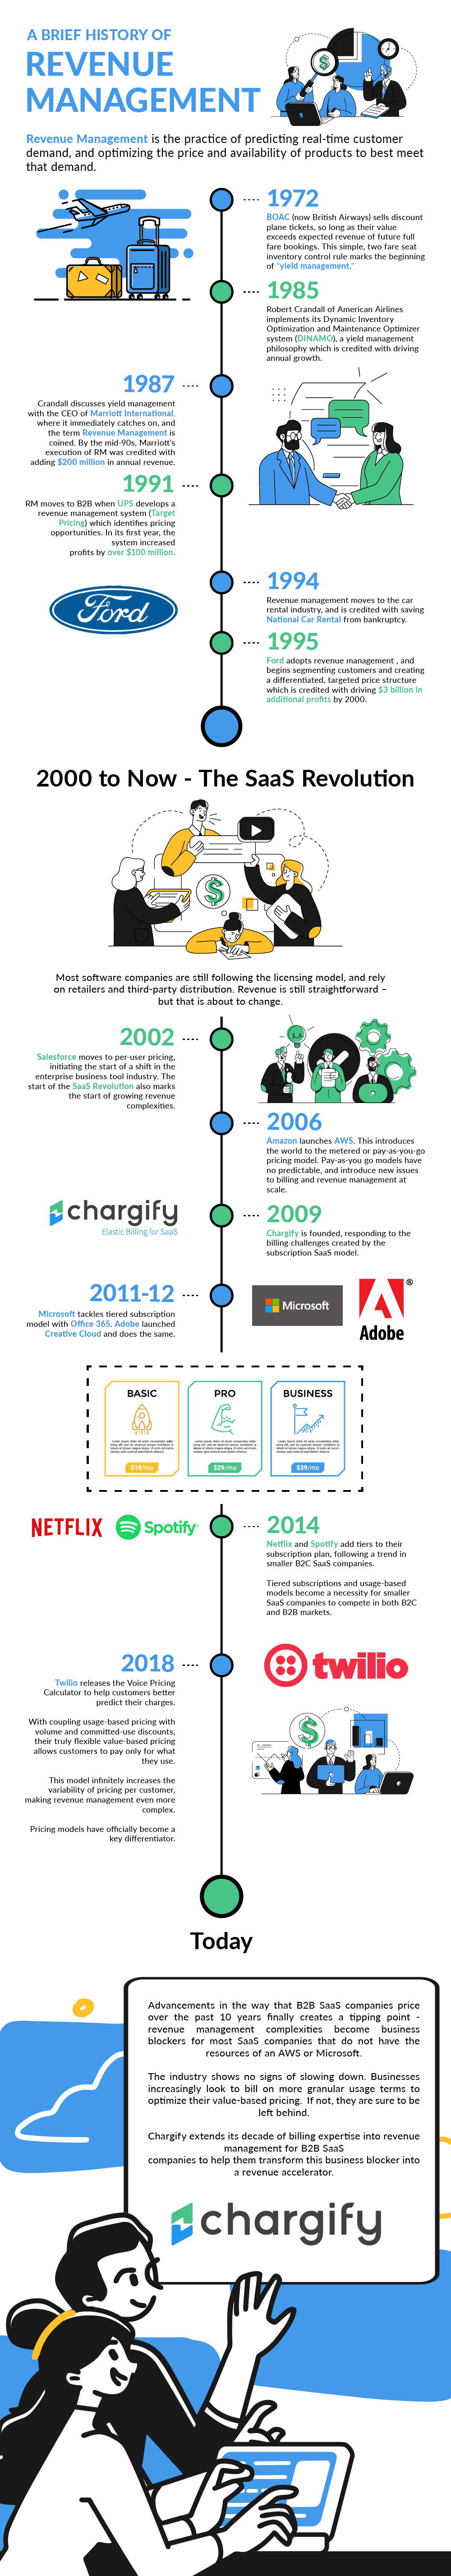 Revised-Infographic-for-Chargify-1-1